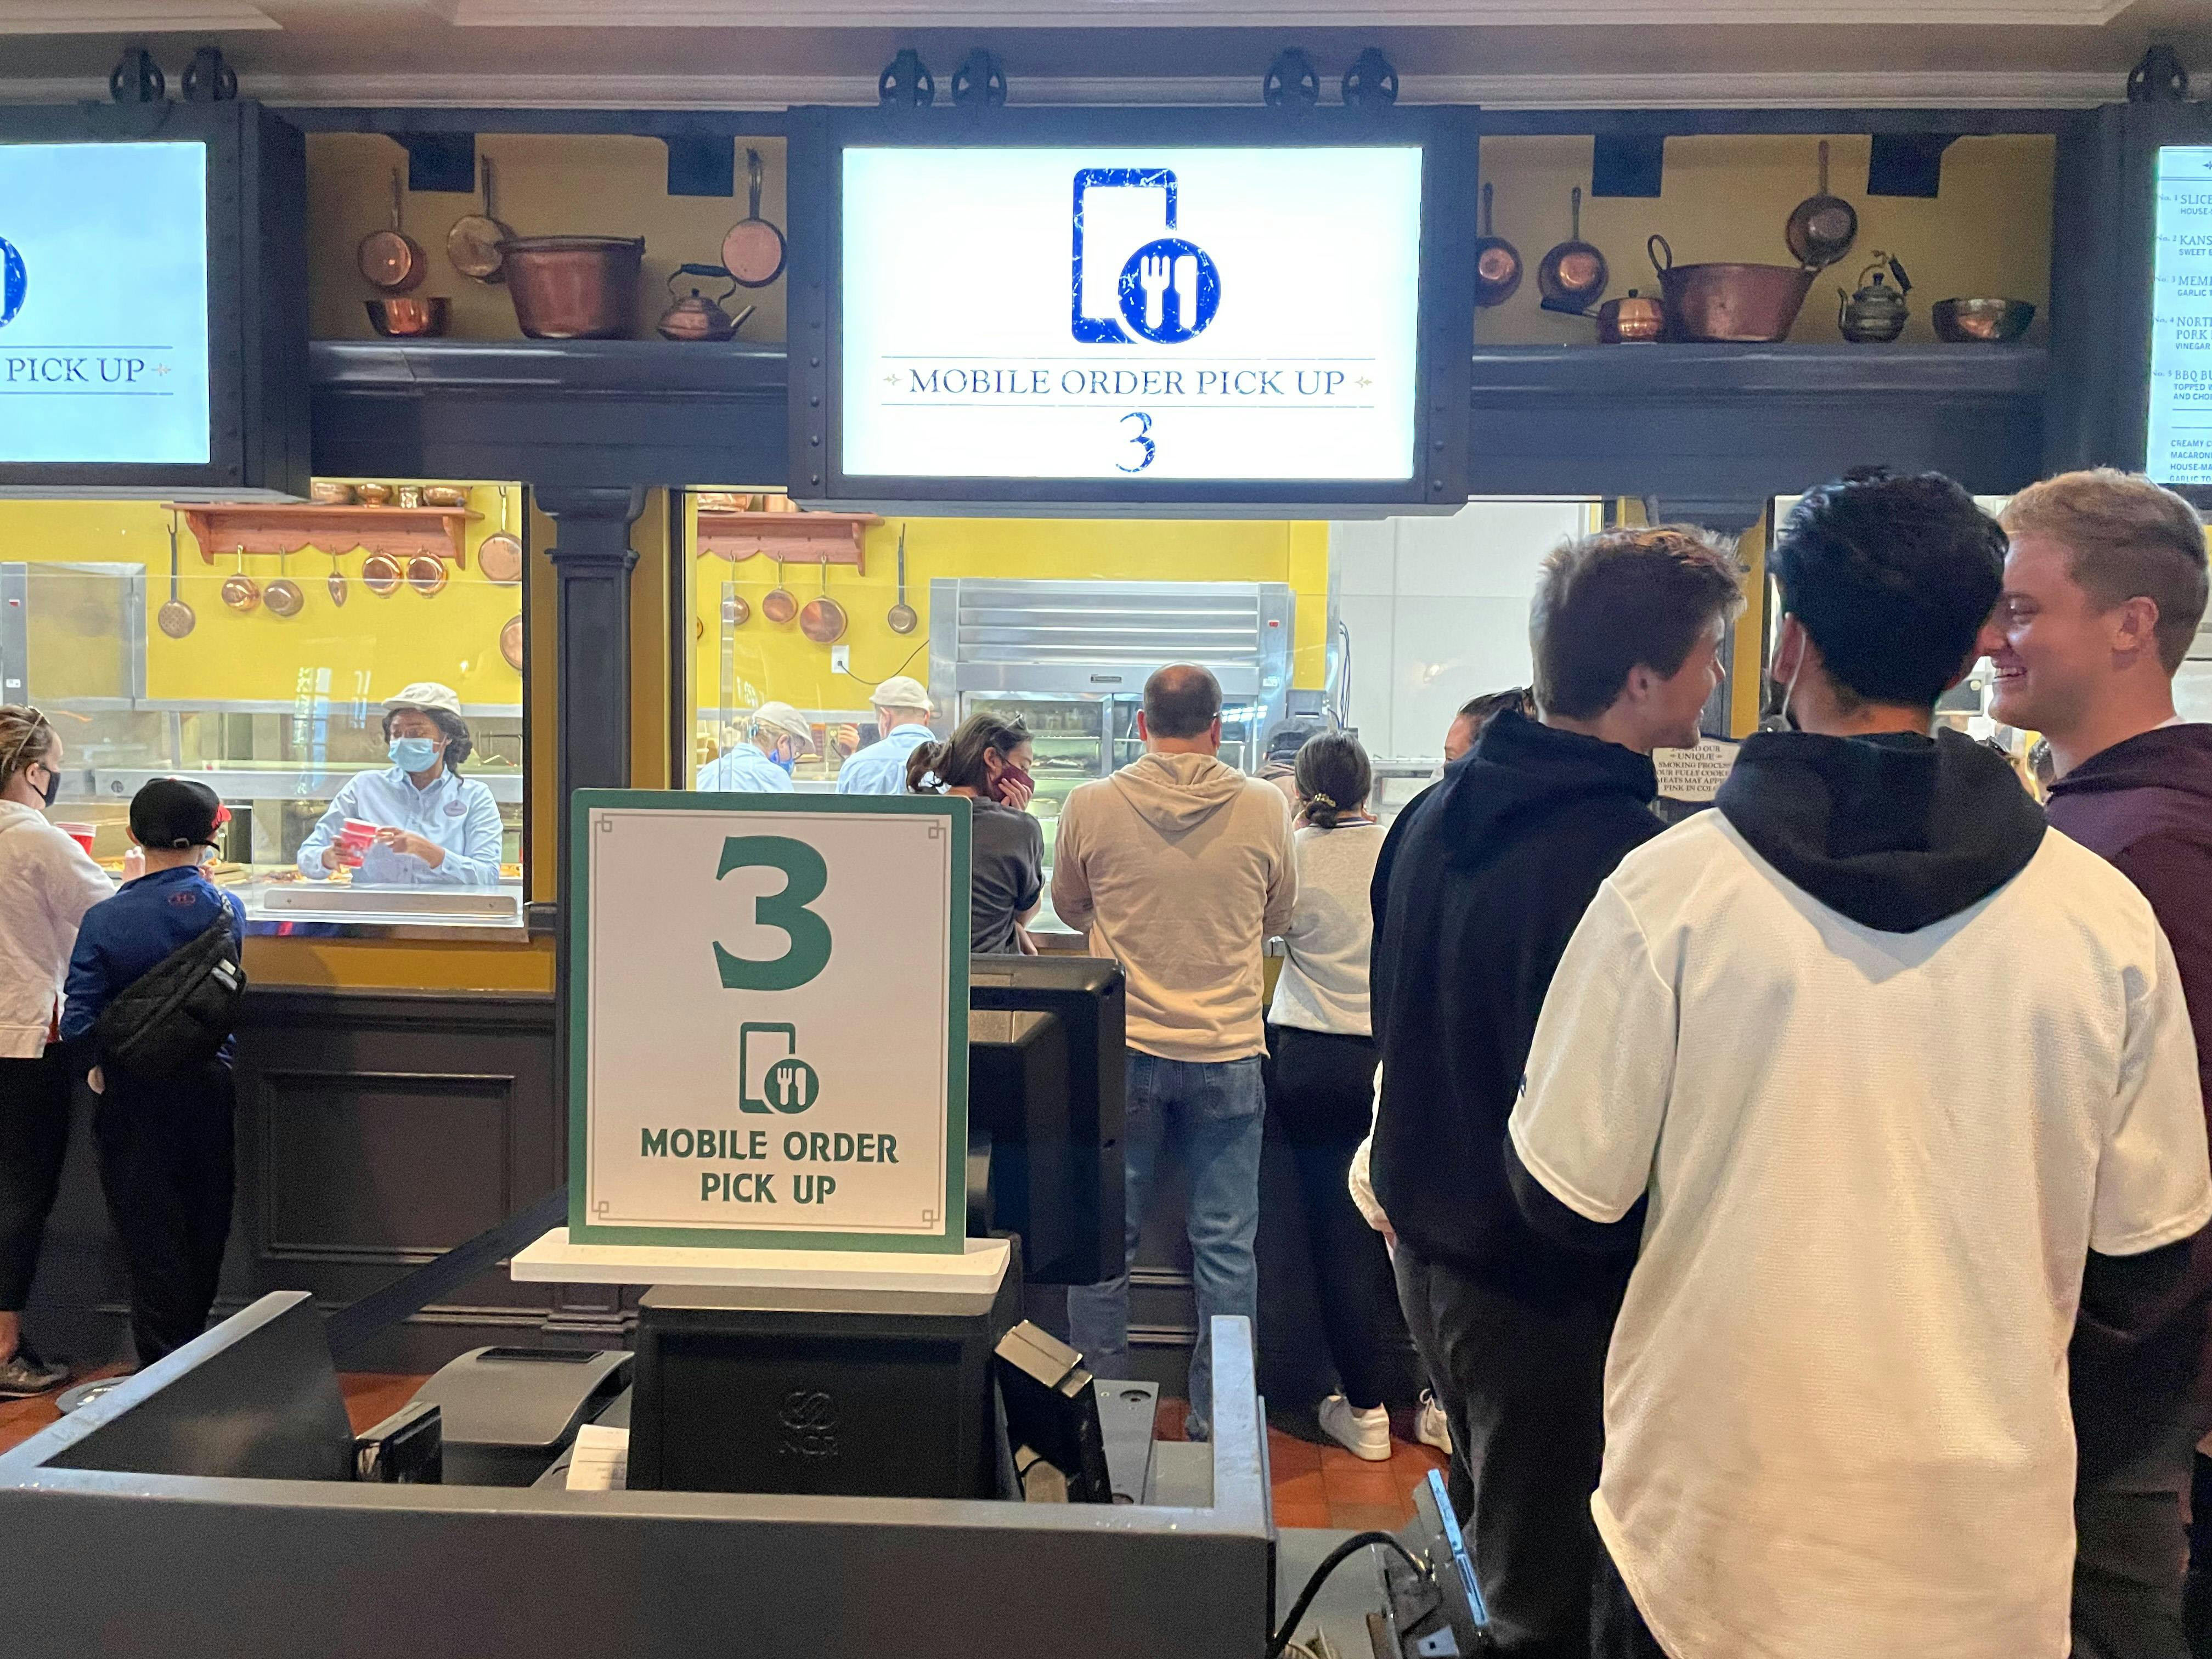 People waiting in line for food at a Disney restaurant with a monitor showing that a mobile order is ready for pick up.